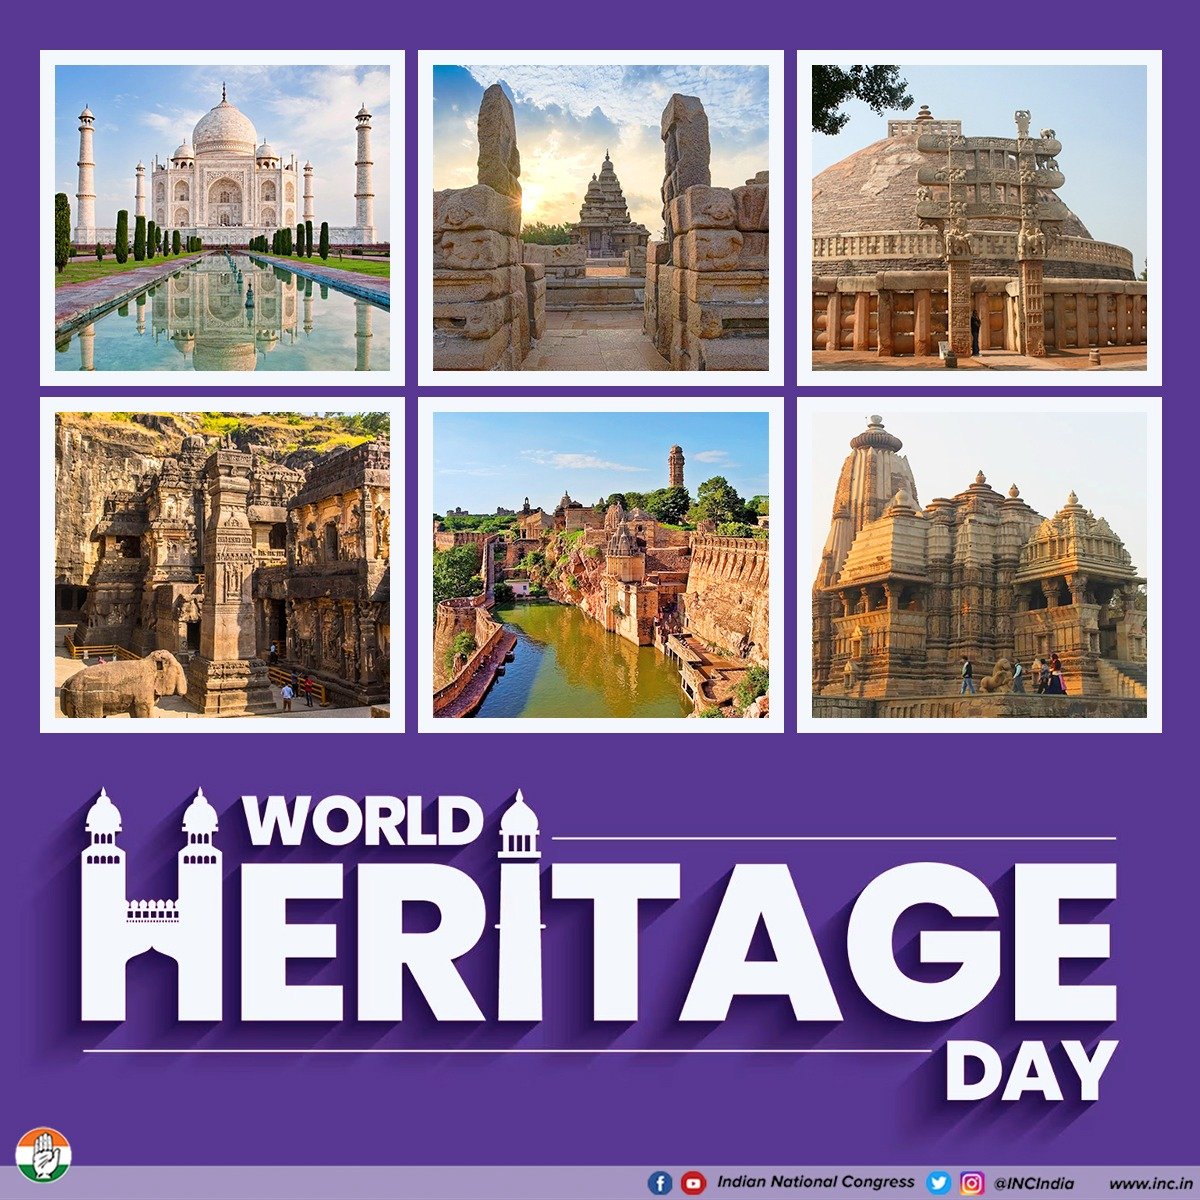 World Heritage Day celebrates the rich, historical & cultural landmarks around the world.

With a rich history & vibrant cultural architectures, India is a treasure trove for everyone to discover and explore.

Let's celebrate our heritage and strive to preserve our glorious past.